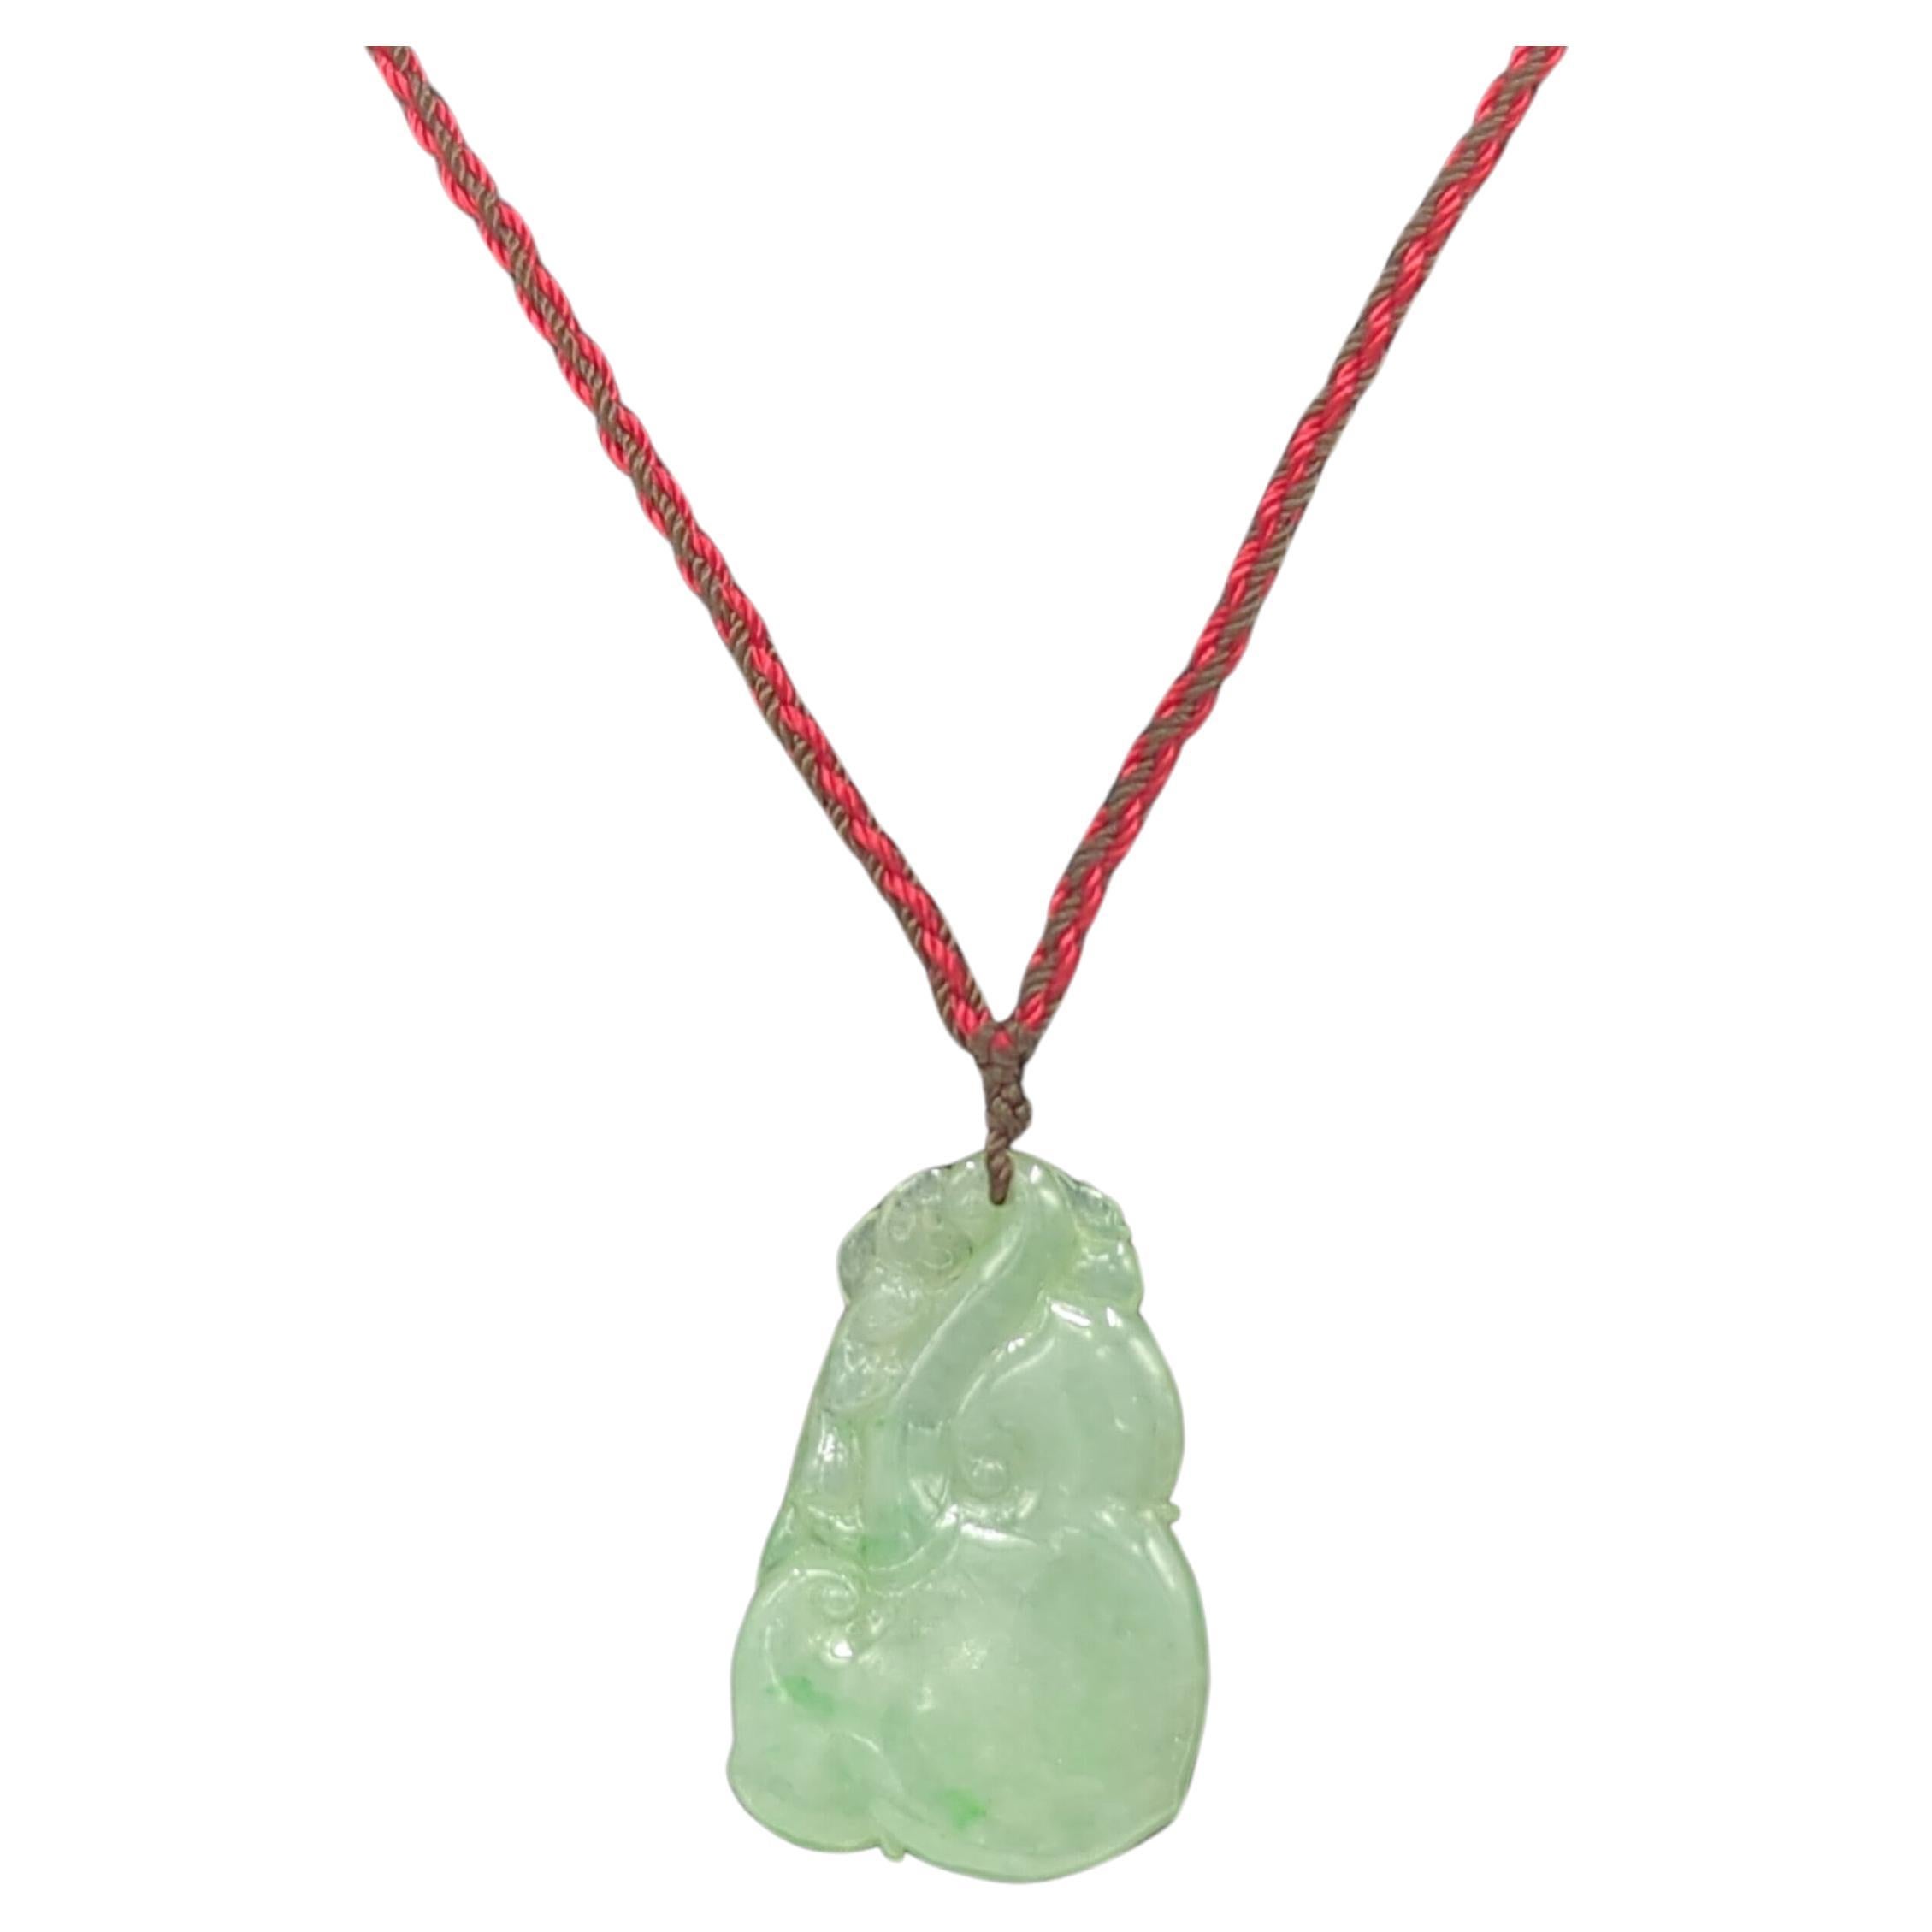 A finely carved and polished translucent jadeite pendant, light green with spot green inclusions, in the form of a stylized ruyi, on a pull string cord necklace with overall length adjustable from 18-24